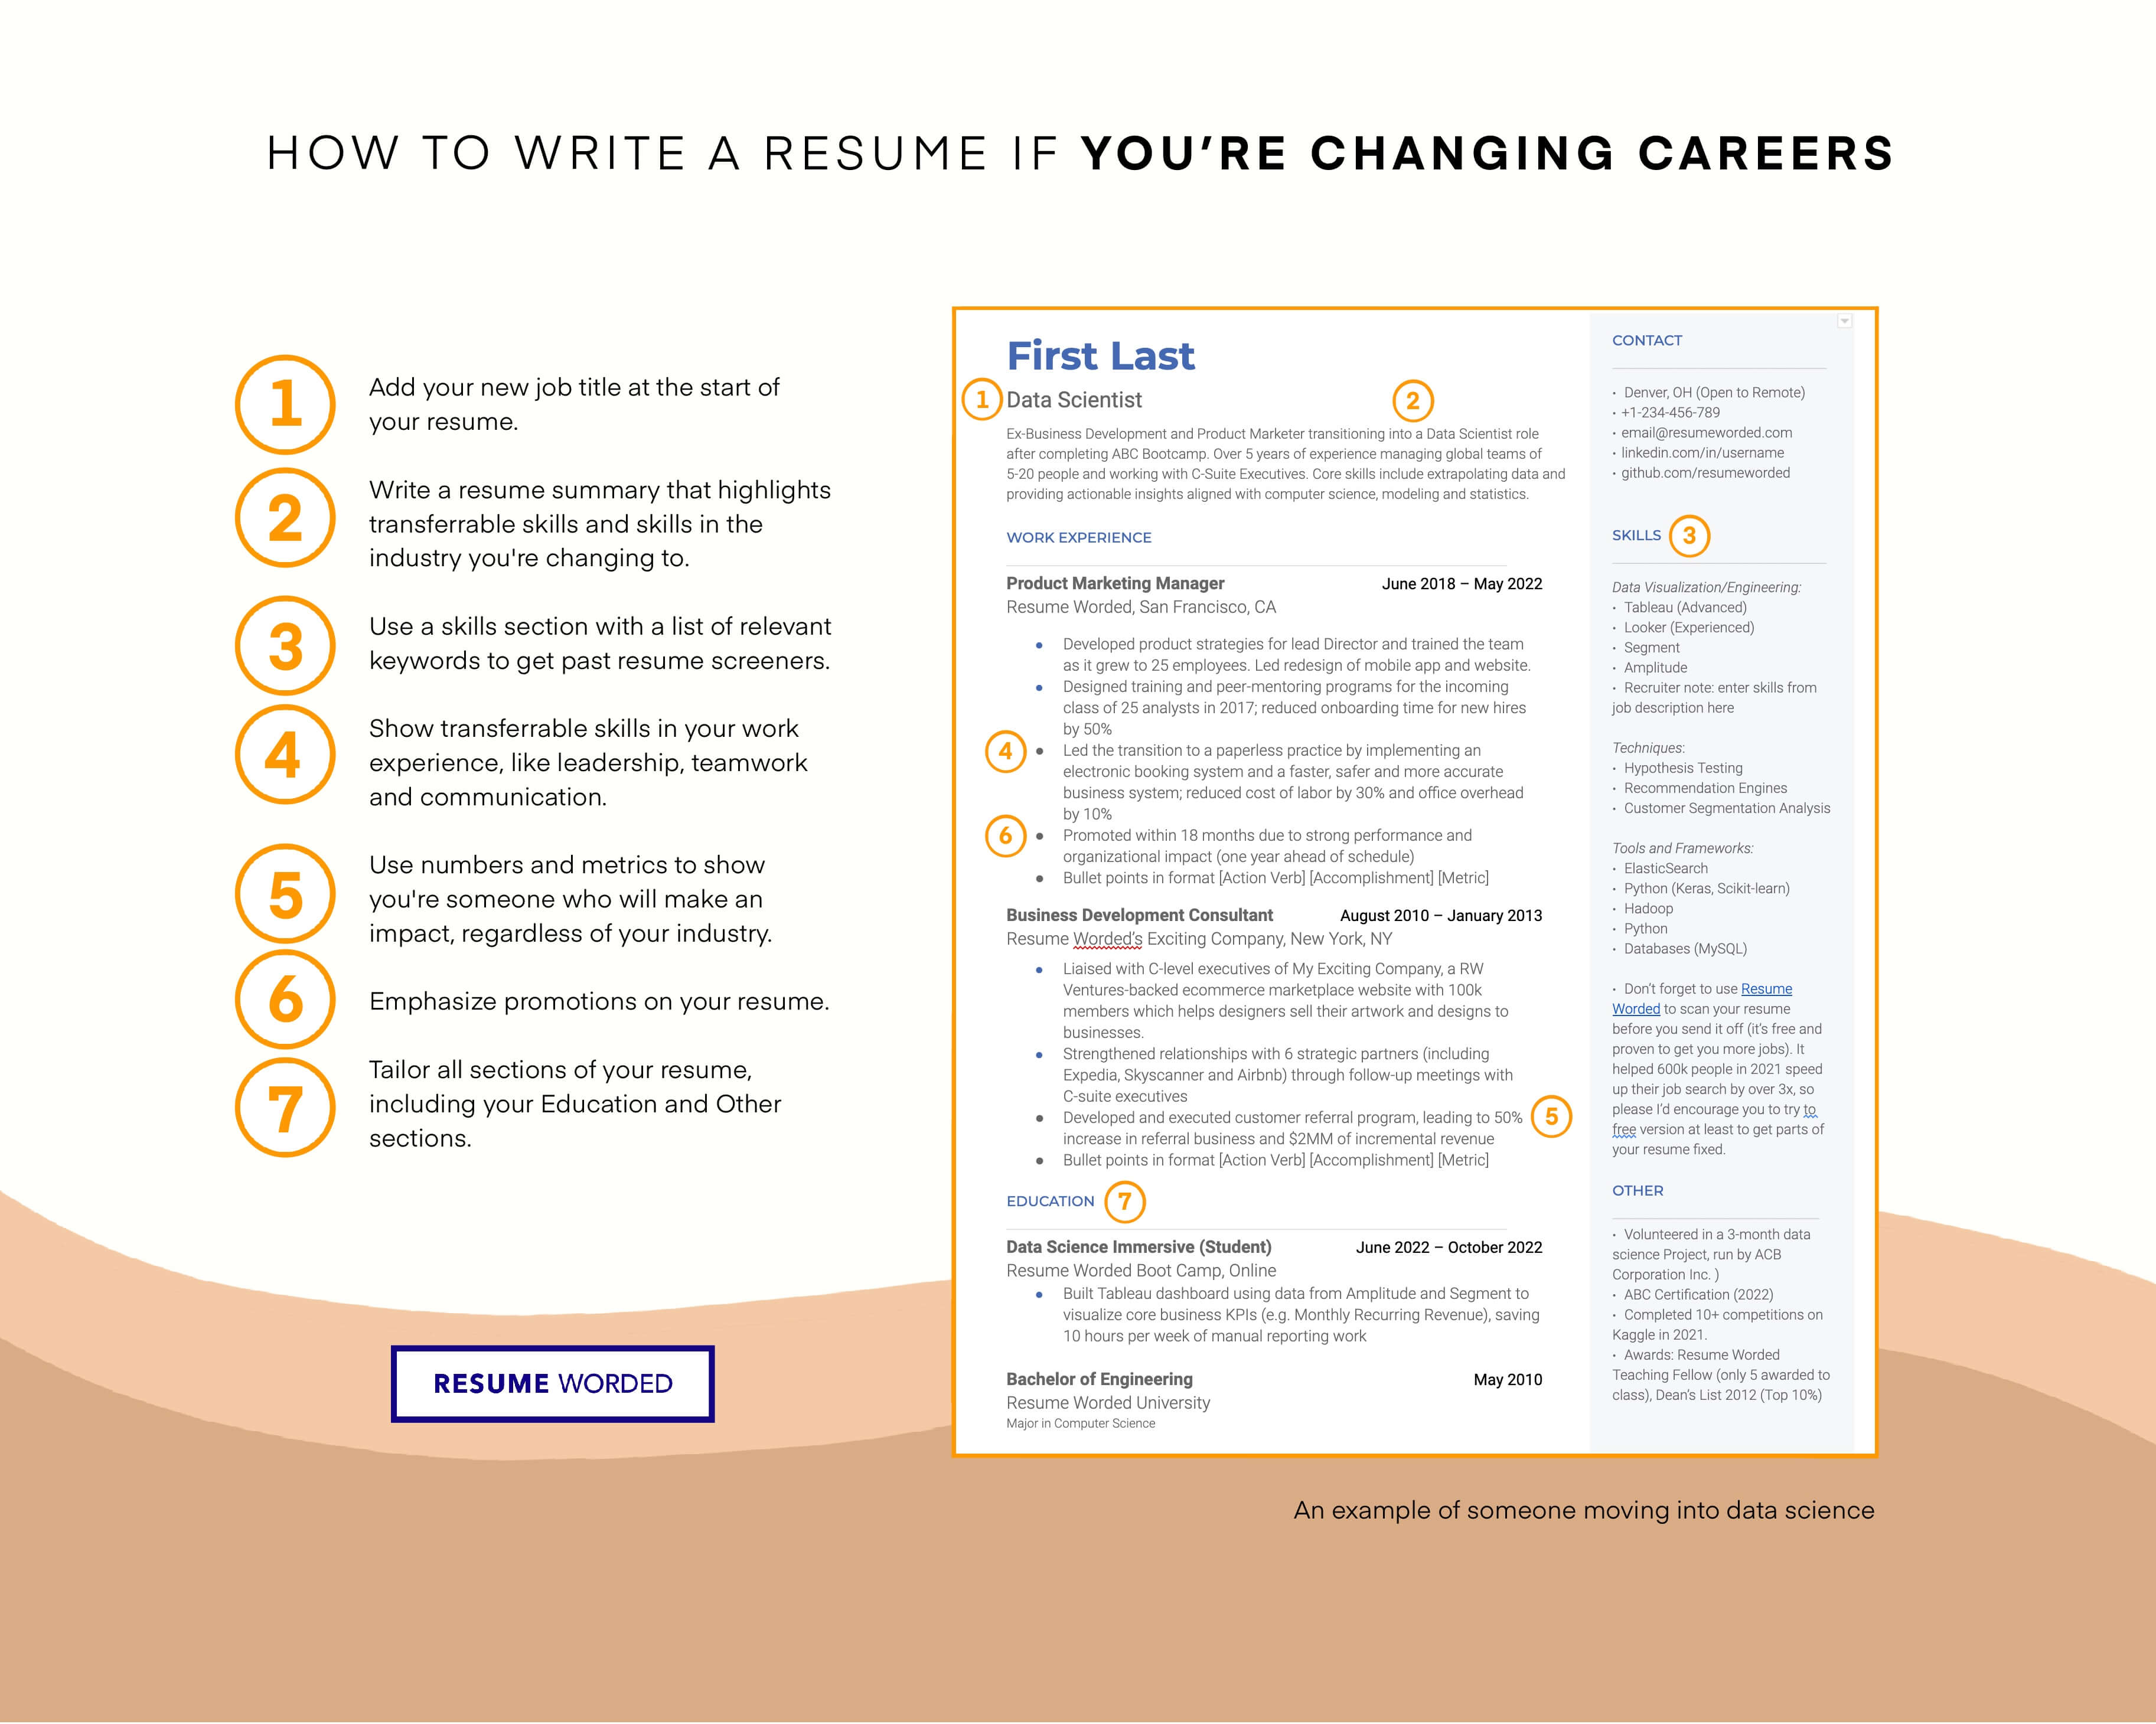 Example template of how to write a career change resume; The summary covers skills that aren't in your experience section, and the skills section is prioritized to highlight keywords and transferable skills.